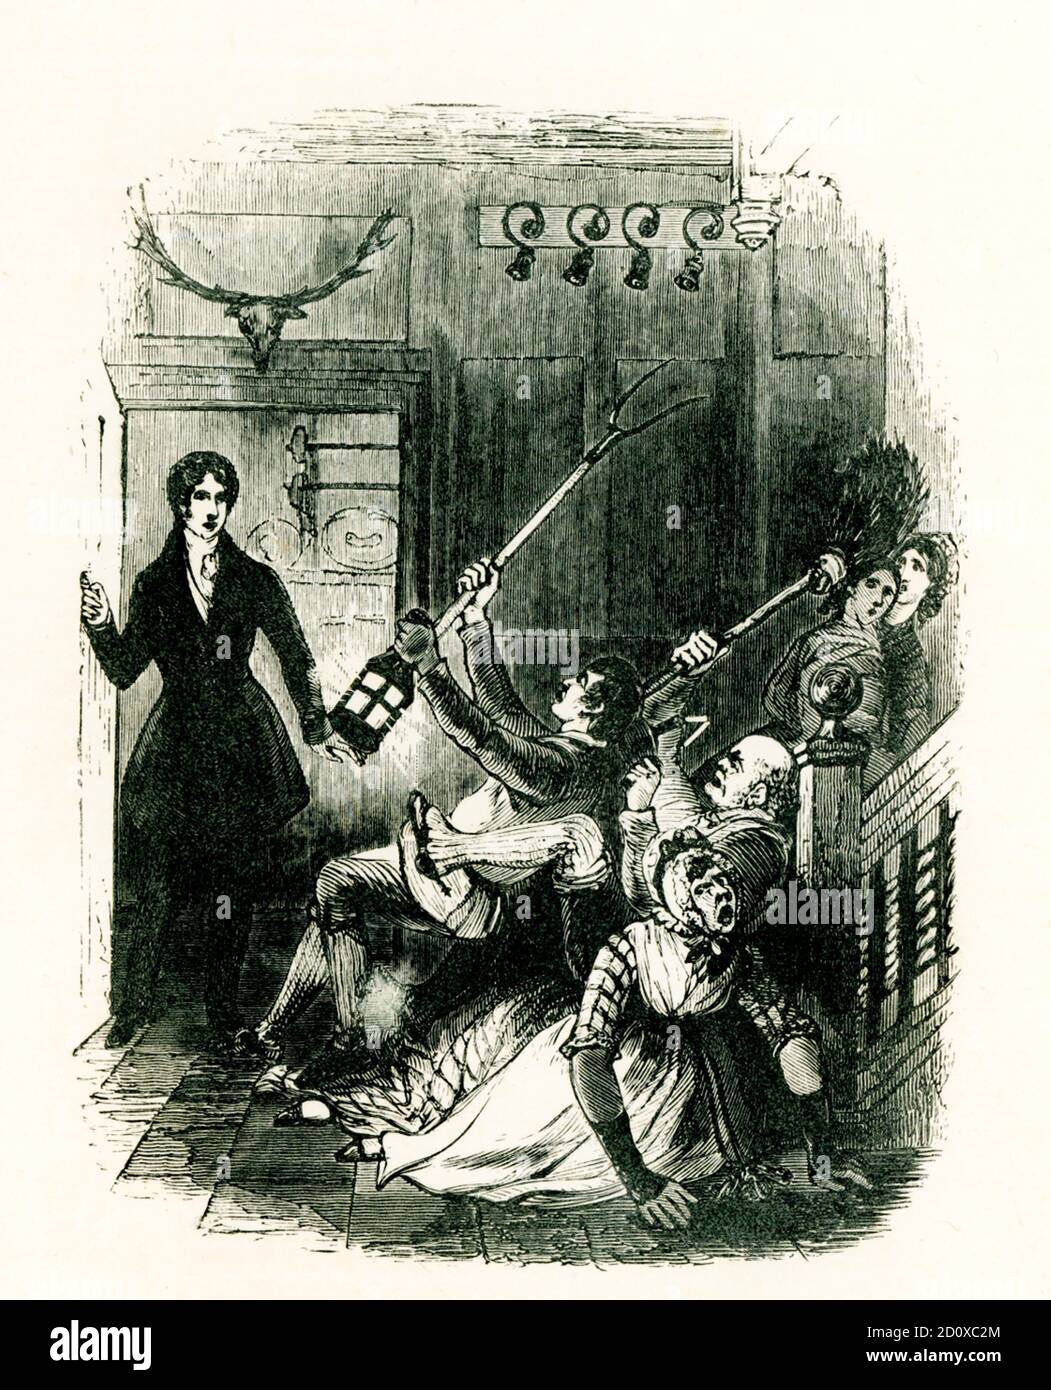 The caption for this 1853 illustration of a novel by Sir Walter Scott reads: Waverley Novels - St Ronan’s Well - Ghaist Indeed Hawl up the candle John Ostler - I’se warrant it a two-handed ghaist and the foor left on the sneck. there’s somebodyin the kitchen — gang forward wi’ the lantern, John Ostler.” At this critical momentm the stranger opened the door of the kitchen, and behold the dame advancing at thehead of her household troops…But, nothwithstanding this admirable disposition, no sooner had the stranger shown his face, and pronounced the words “Mrs dods!” than a panic seized the whole Stock Photo